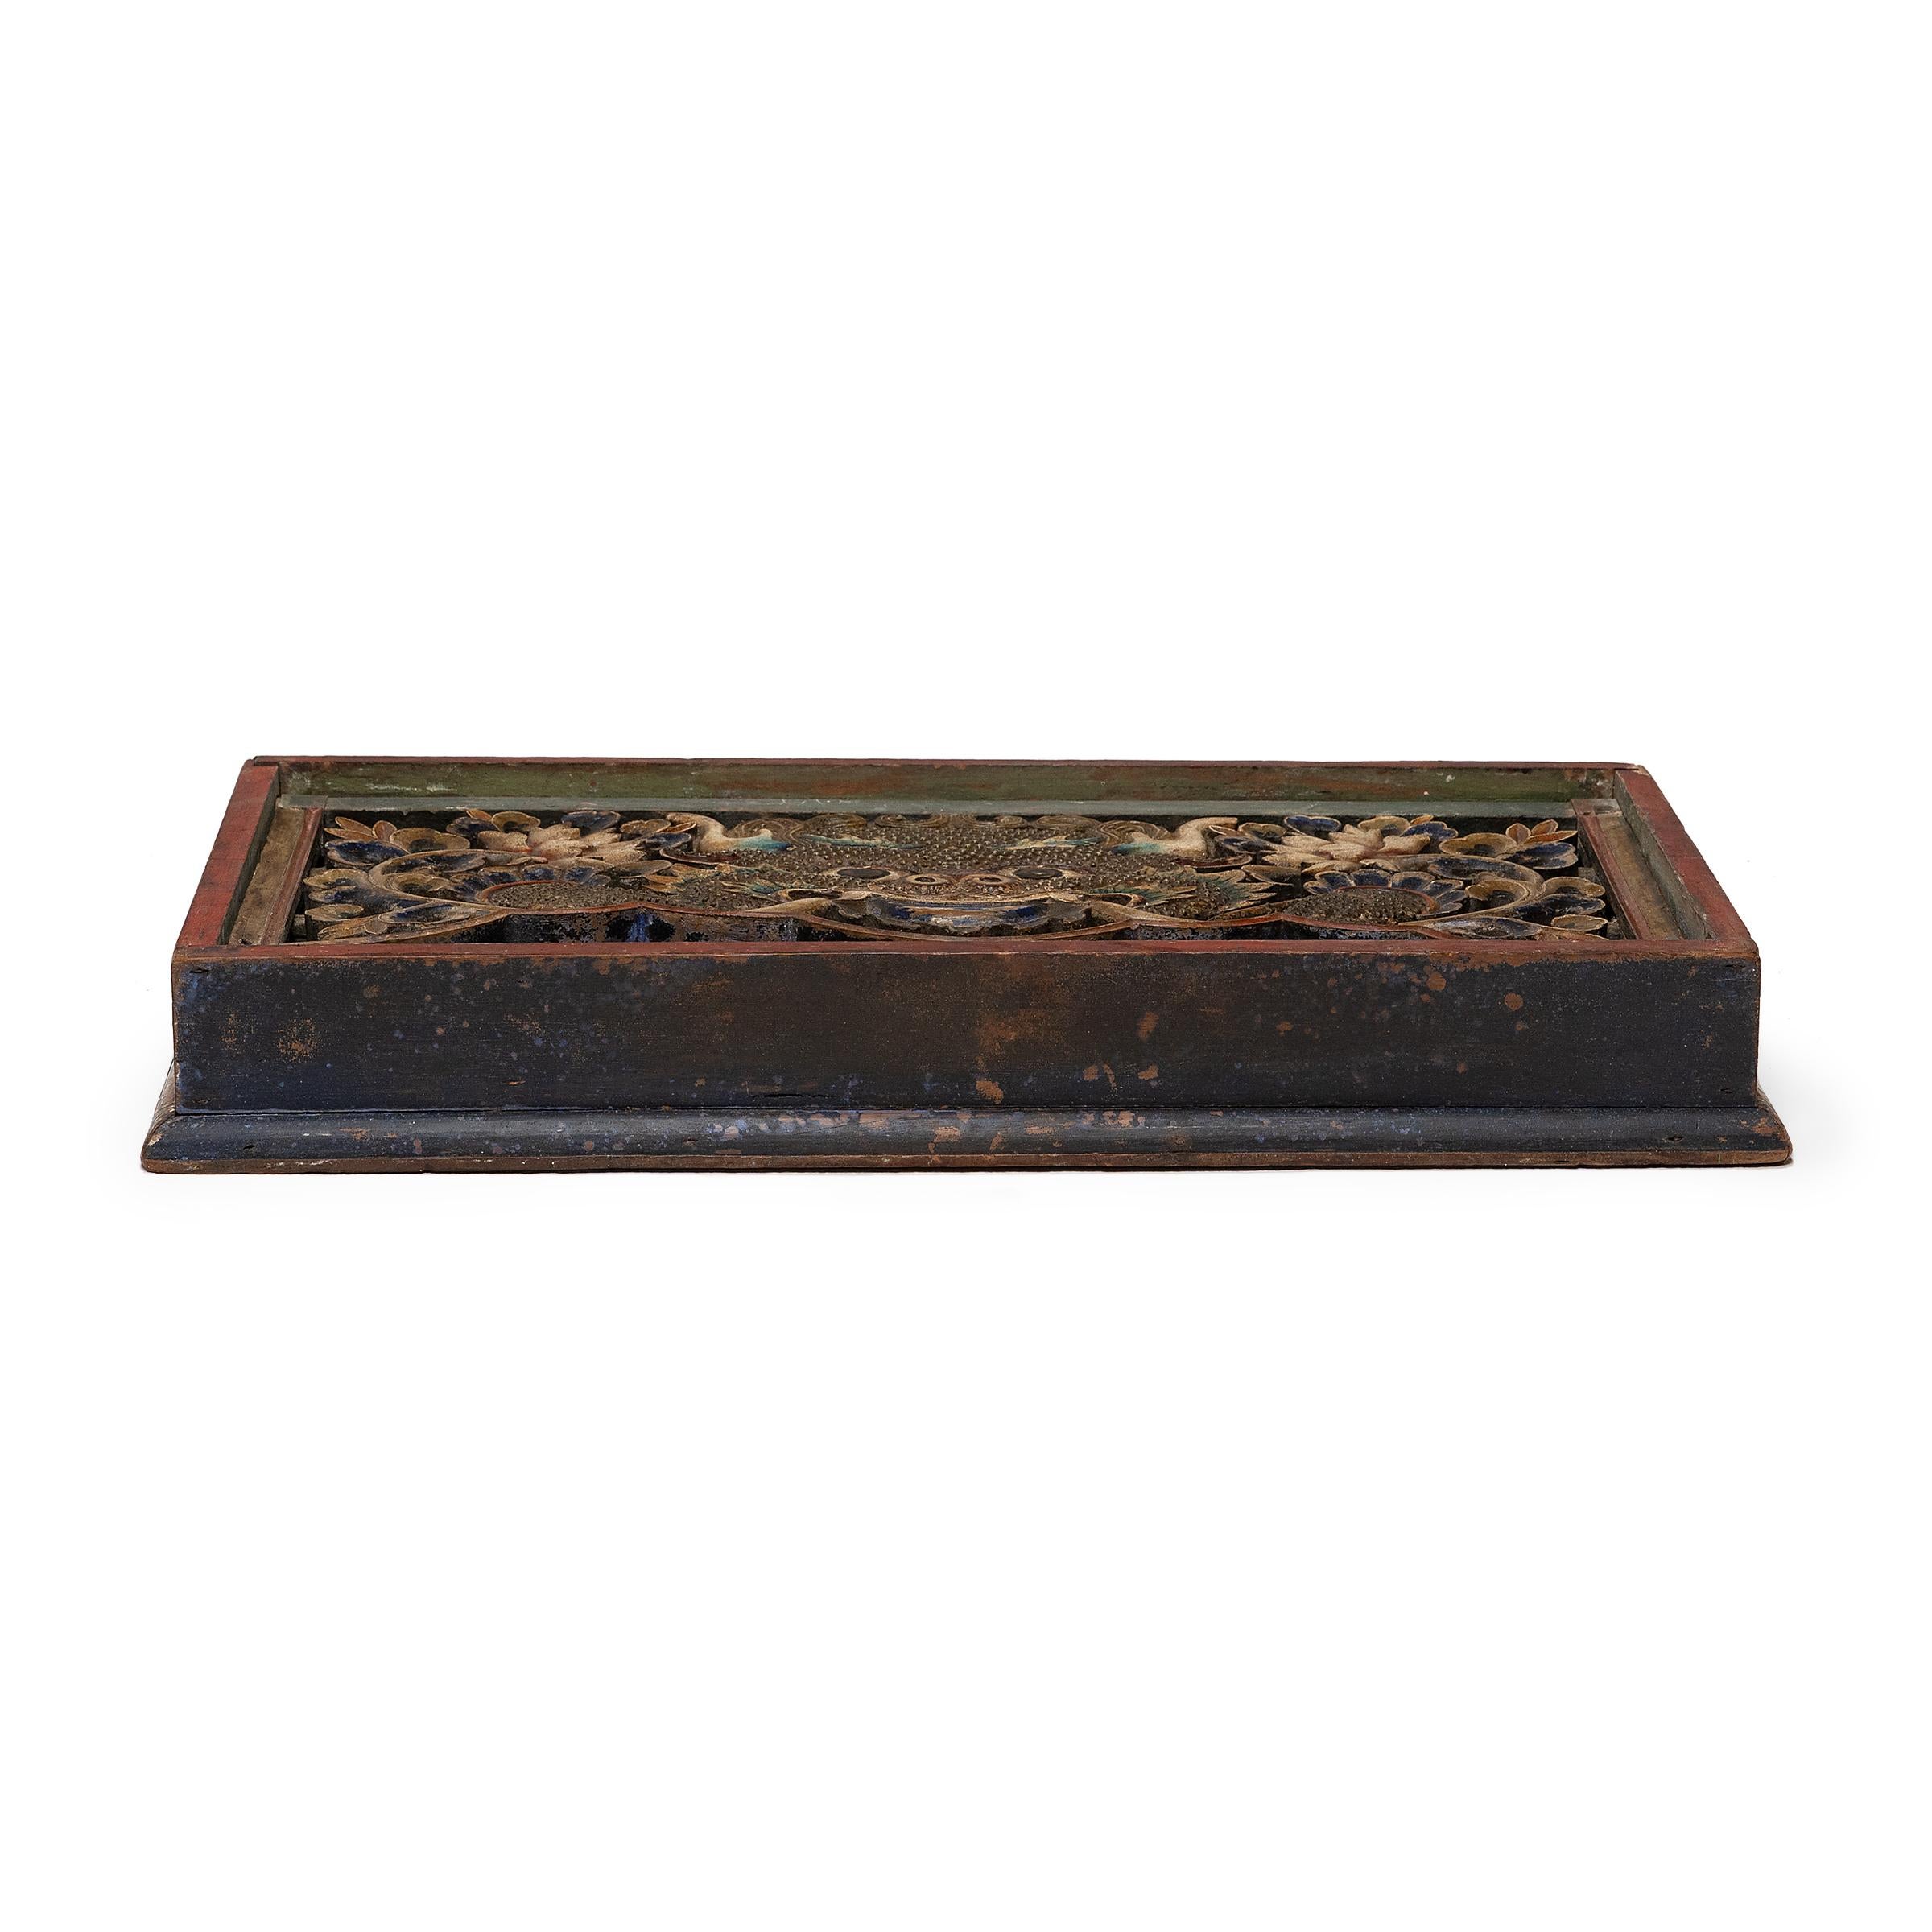 Wood Tibetan Traveler's Table with Face of Glory, c. 1900 For Sale